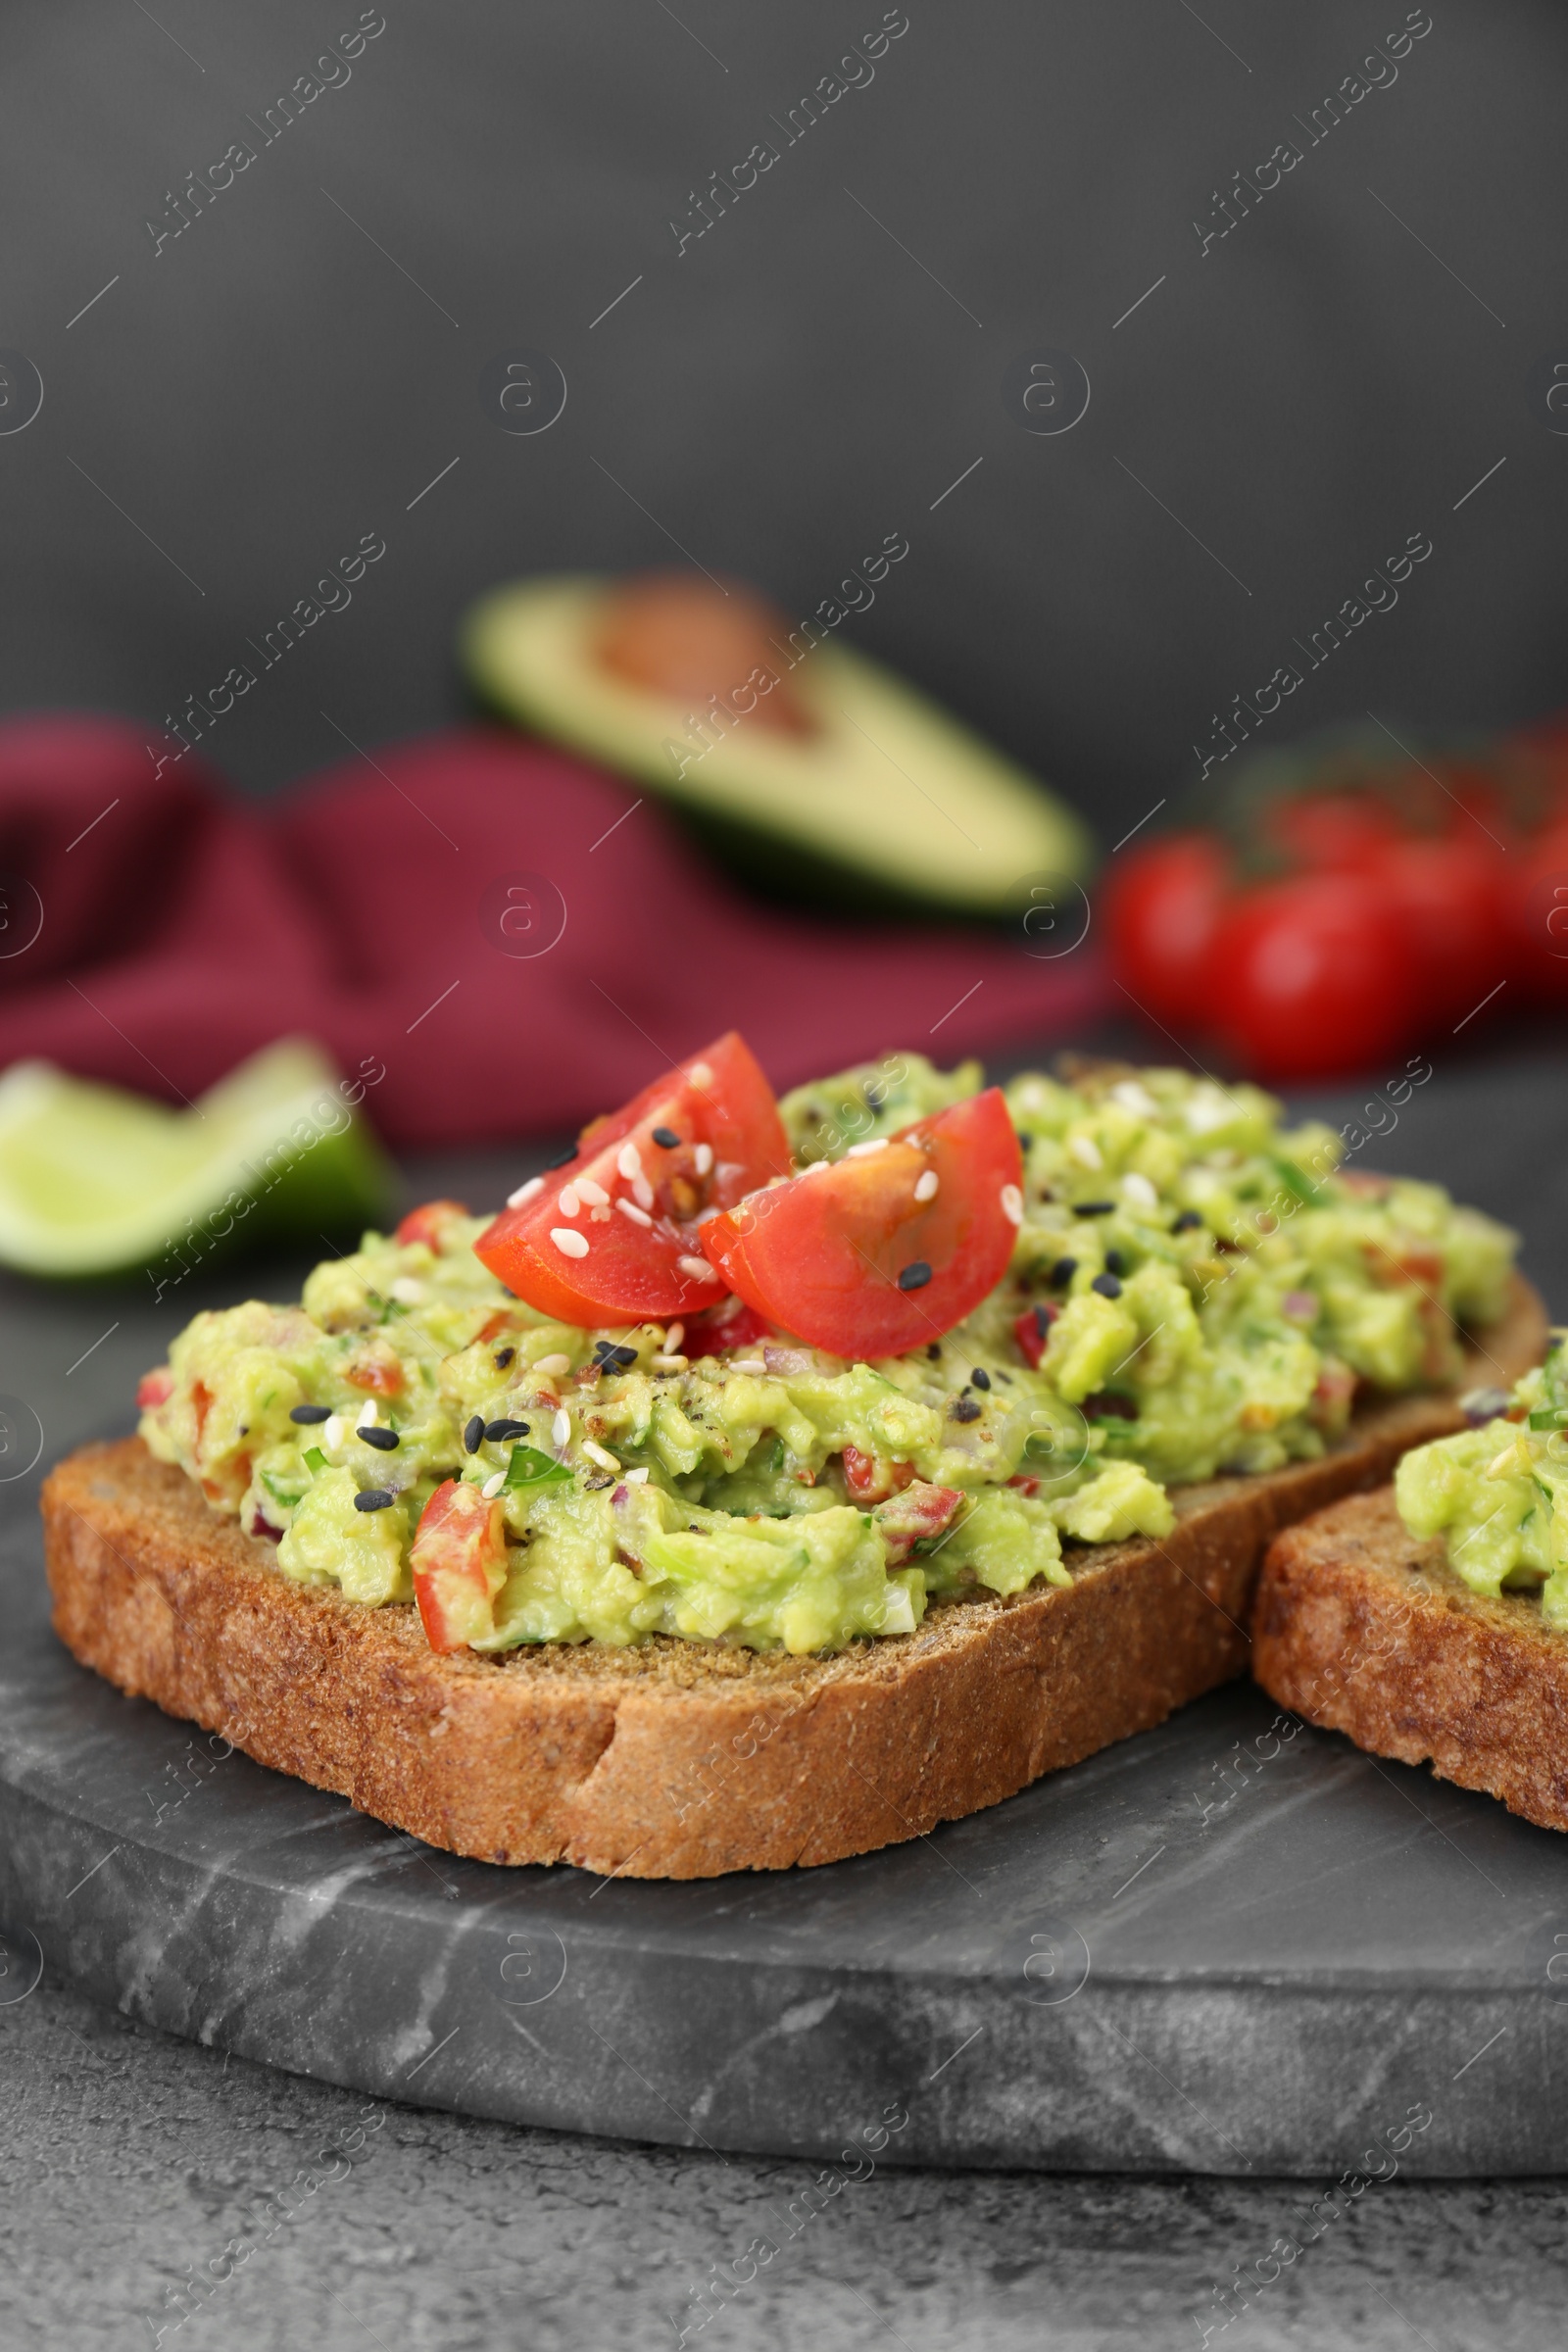 Photo of Slices of bread with tasty guacamole and ingredients on grey table, closeup